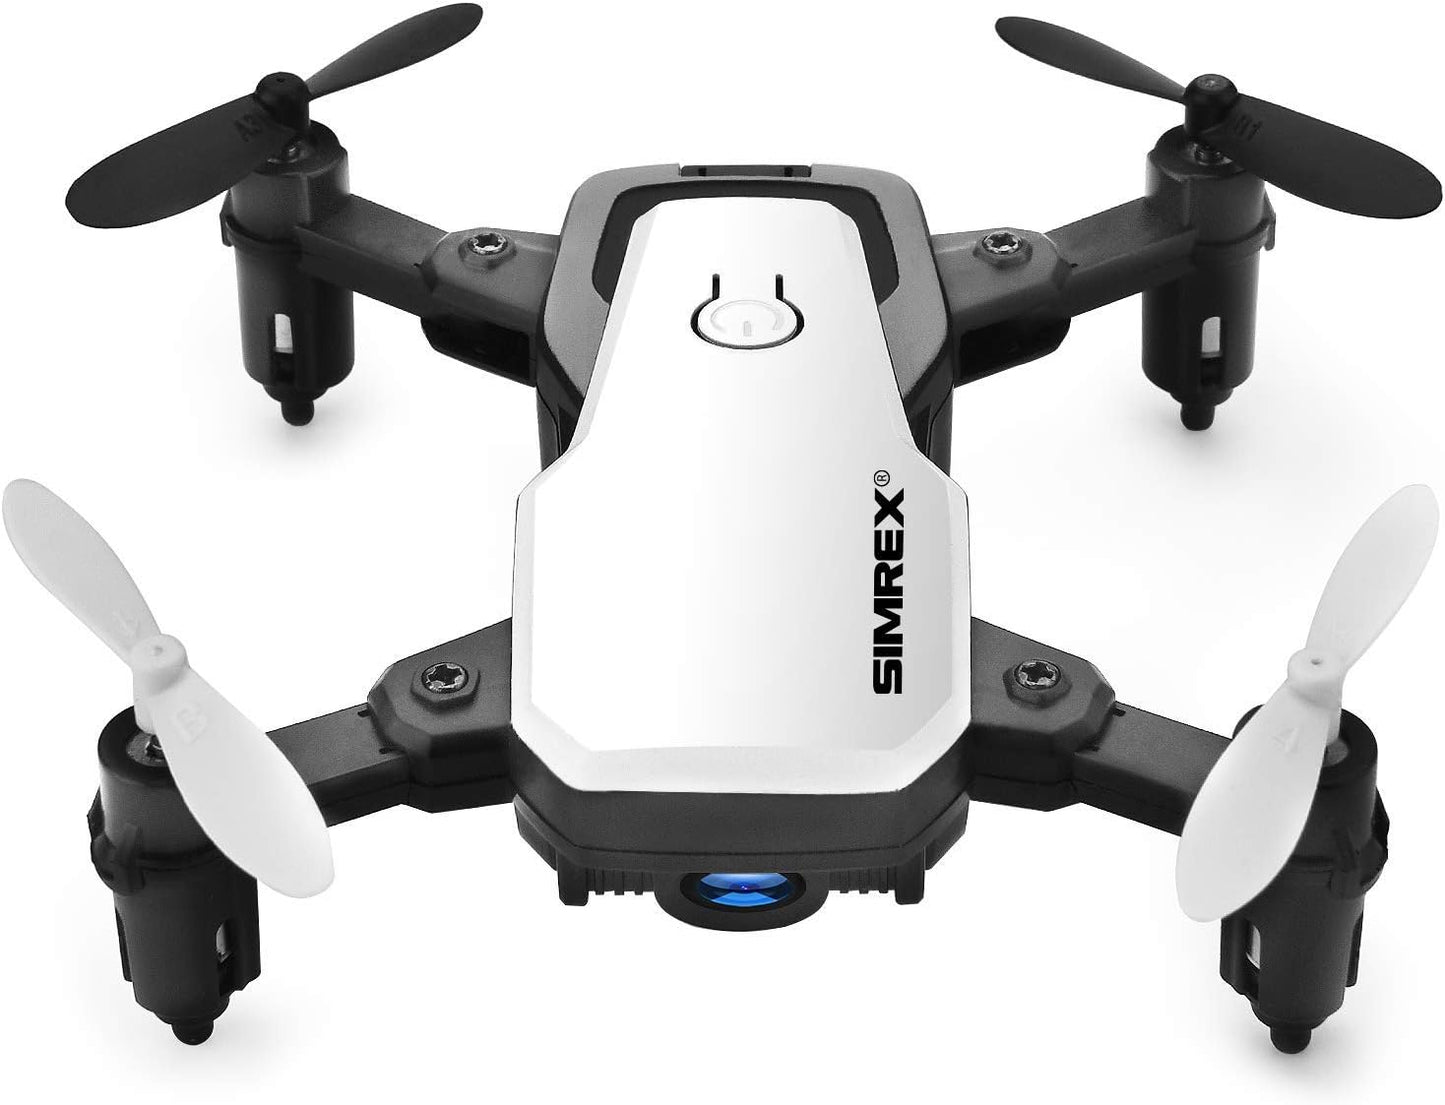 SIMREX X300C 8816 Mini Drone with Camera WiFi HD FPV Foldable RC Quadcopter Rtf 4CH 2.4Ghz Remote Control Headless [Altitude Hold] Super Easy Fly for Training White